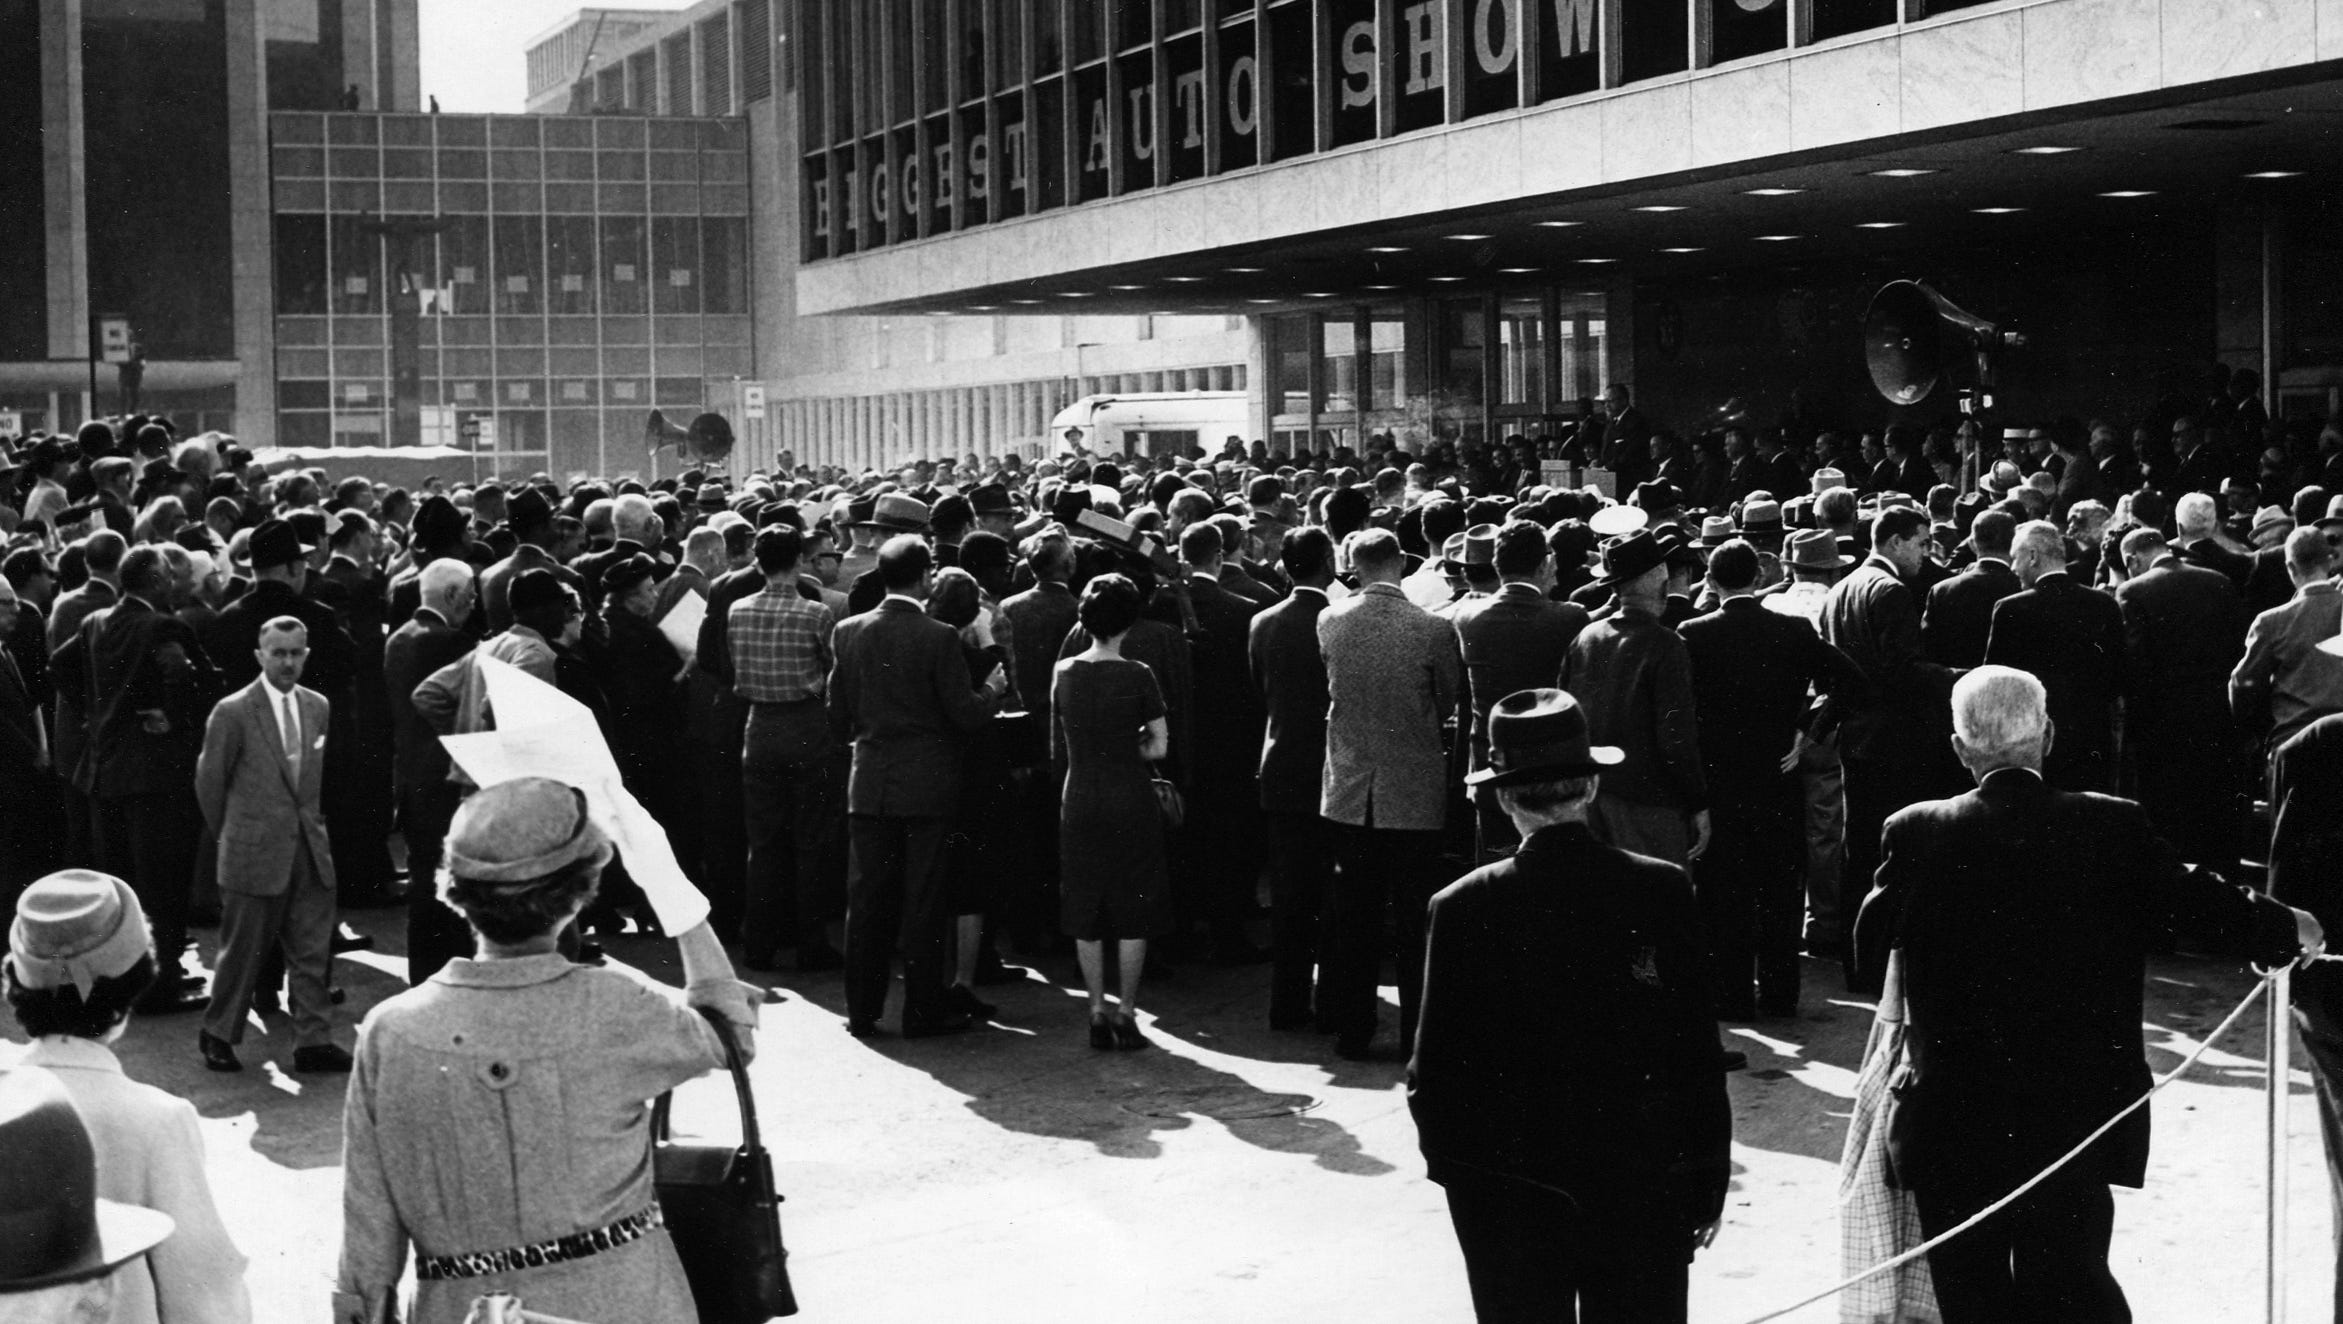 Crowds gather for a public dedication on Oct. 20, 1960. The 12,000-seat Cobo Arena, left, attached to the Cobo Center and has been the scene of countless concerts, sporting events, graduation ceremonies and political rallies during its lifetime.